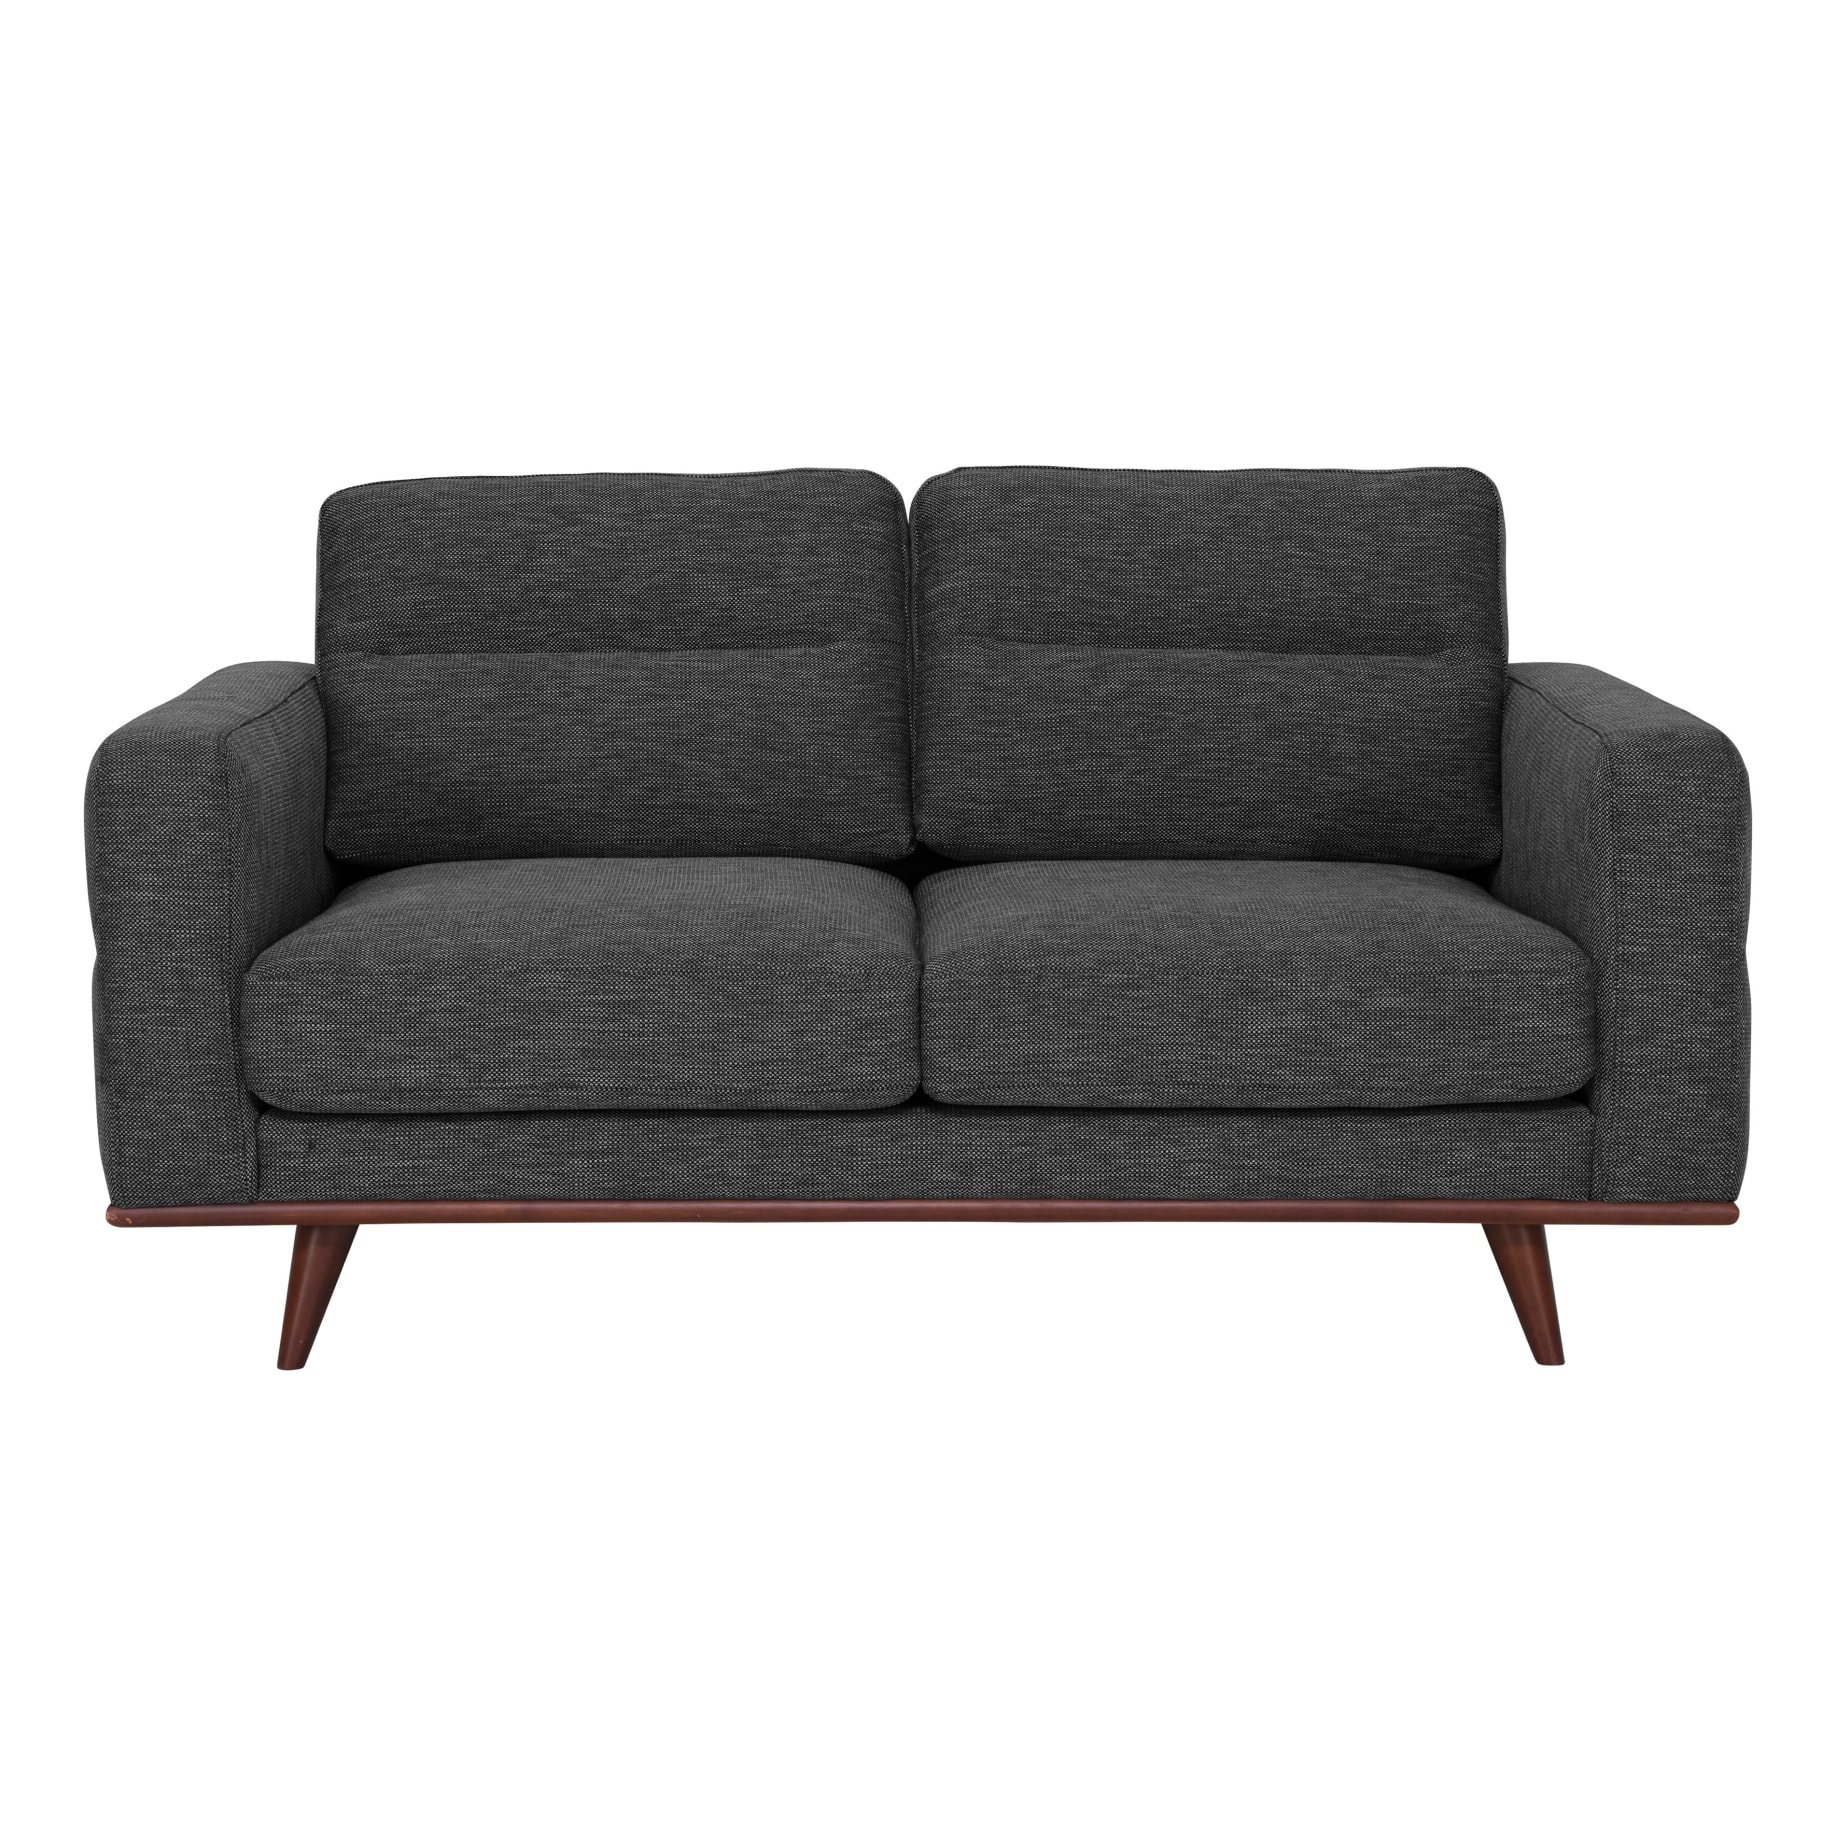 Astrid 2 Seater Sofa in Talent Charcoal